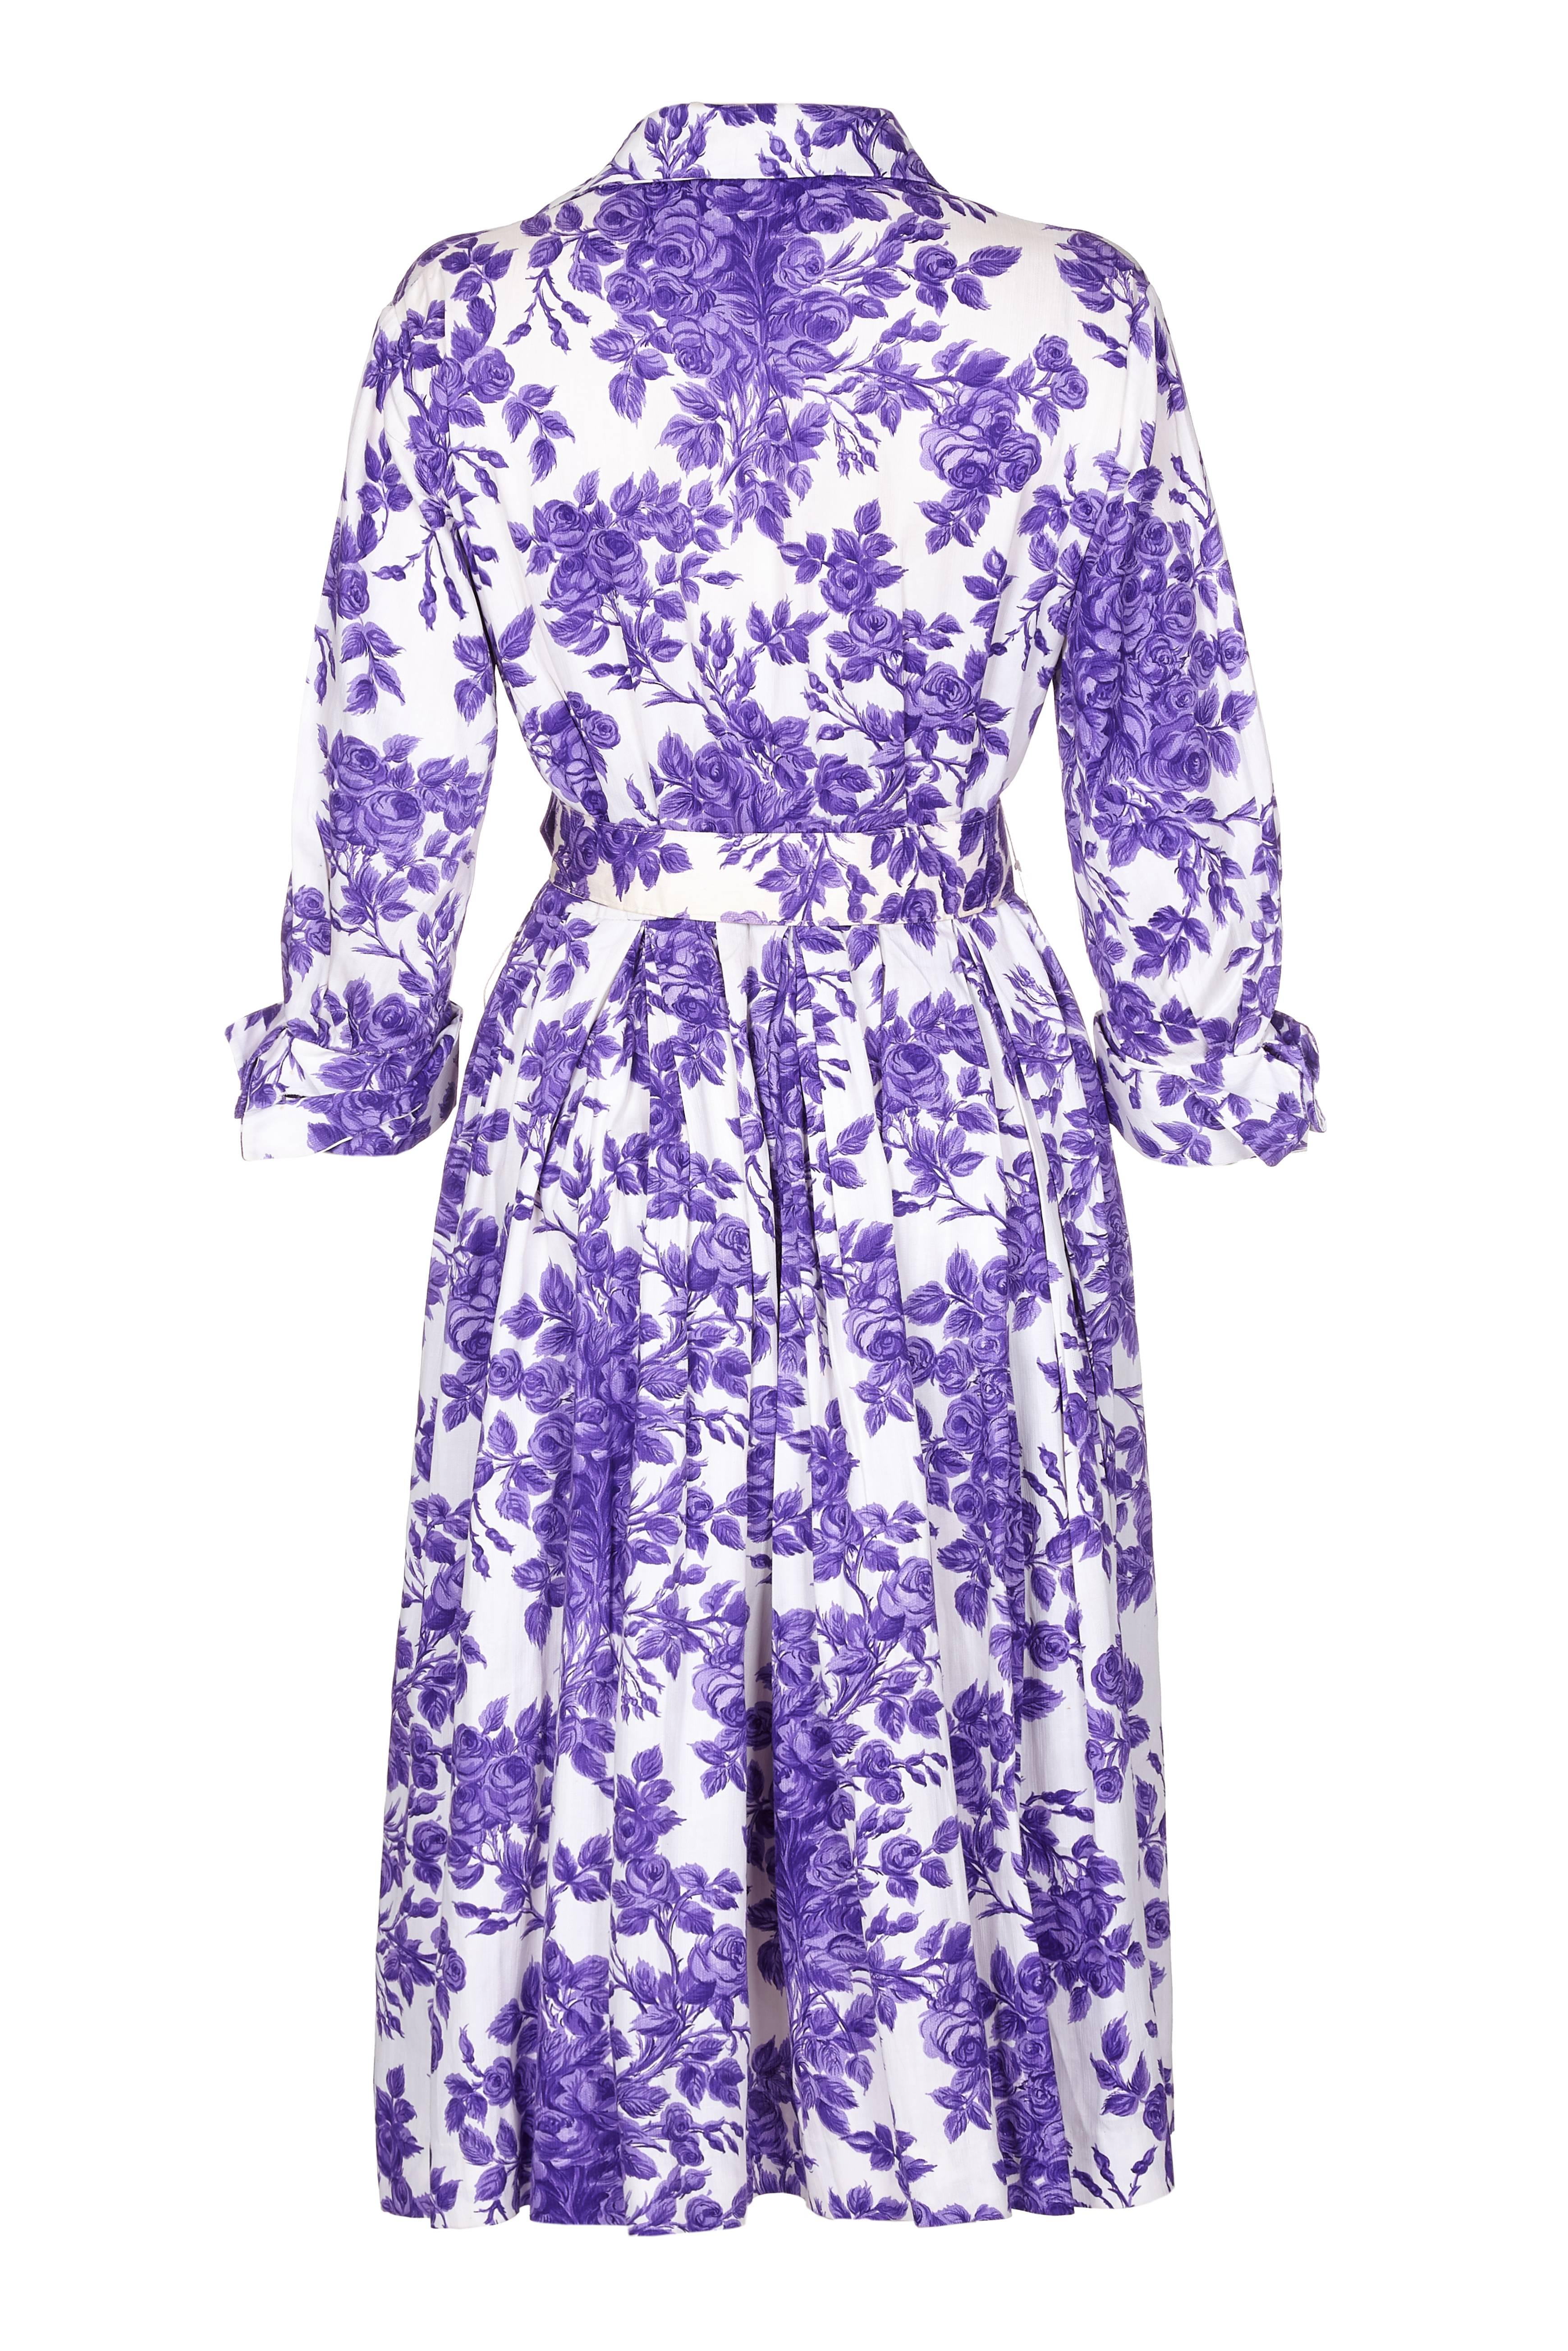 This lovely 1960s Tudor shirt waister dress with a purple rose print is made from a mid weight cotton. It will be perfect in the summer and the bright pattern will make a very nice dress for a wedding. The sleeves come to just above the elbow and